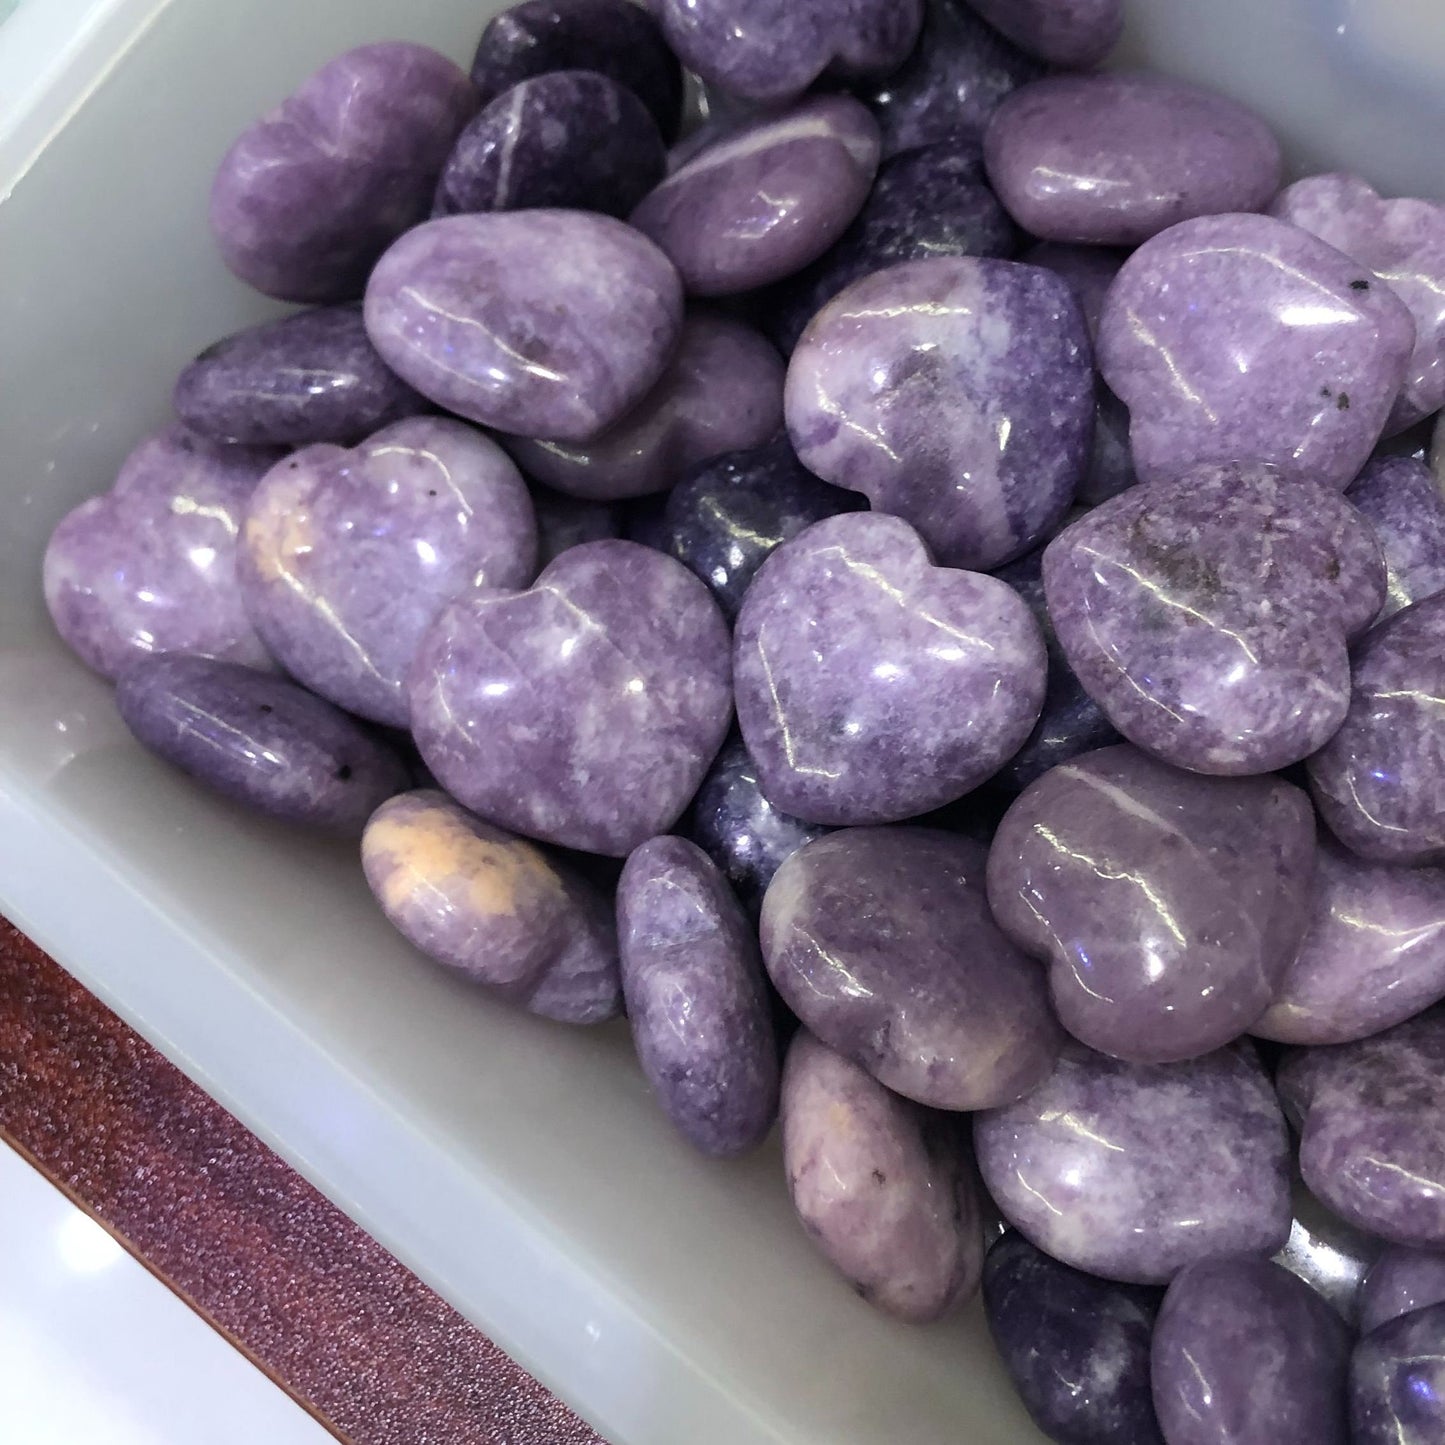 Natural Purple Mica Heart Crystal Stones for Home Decoration and Chakra Healing - Set of 10